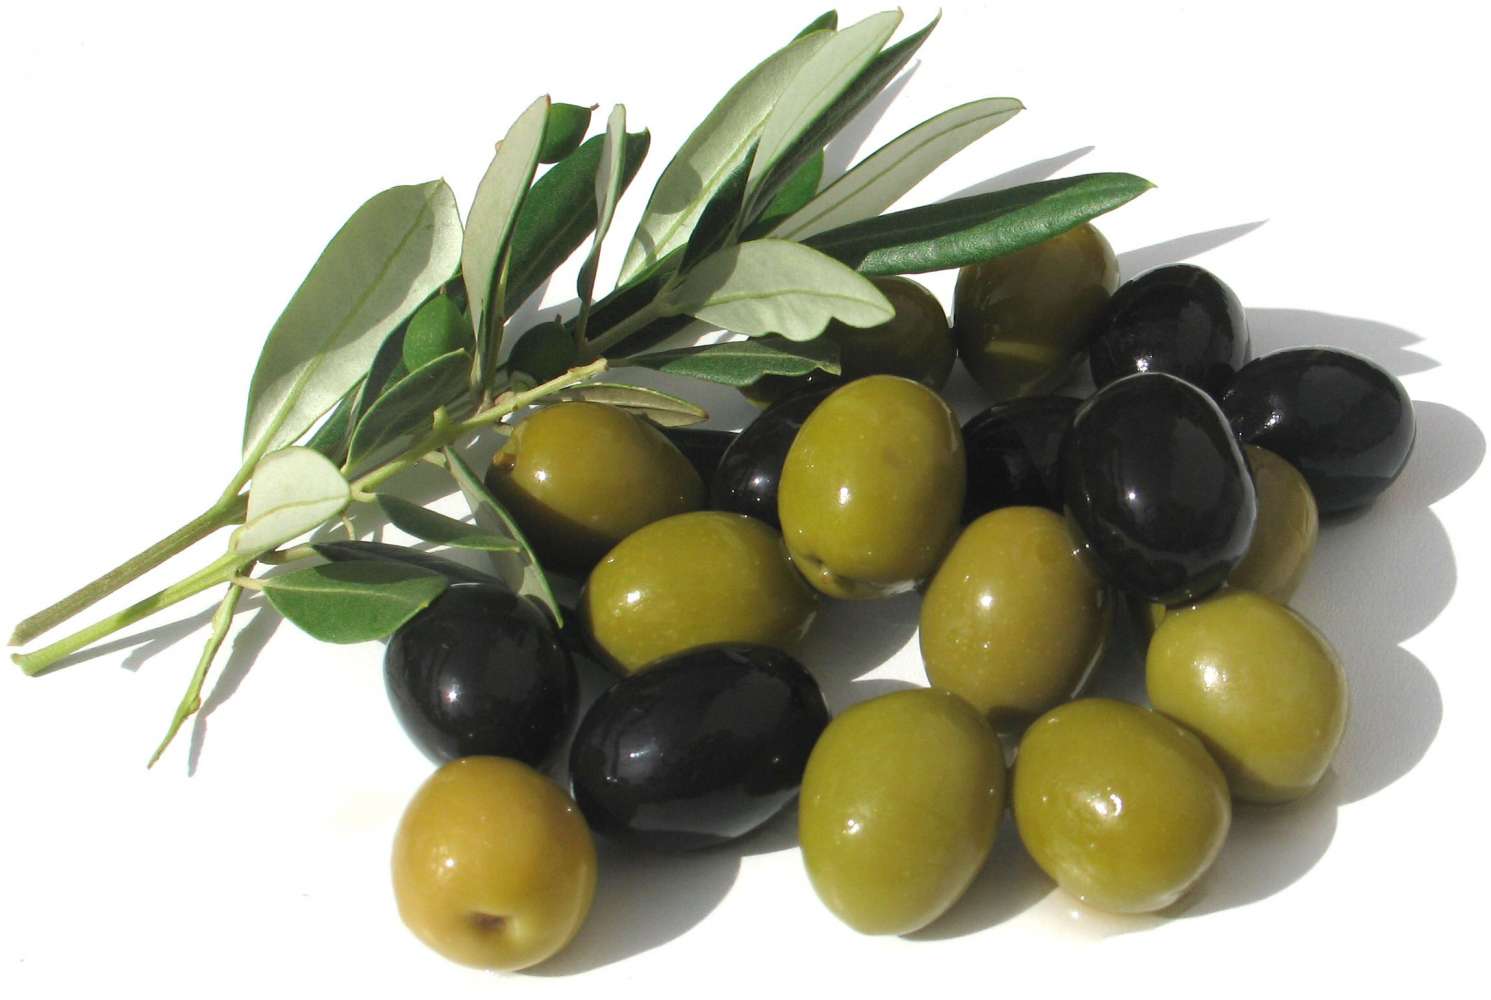 Olive Leaf Extract for the Heart!